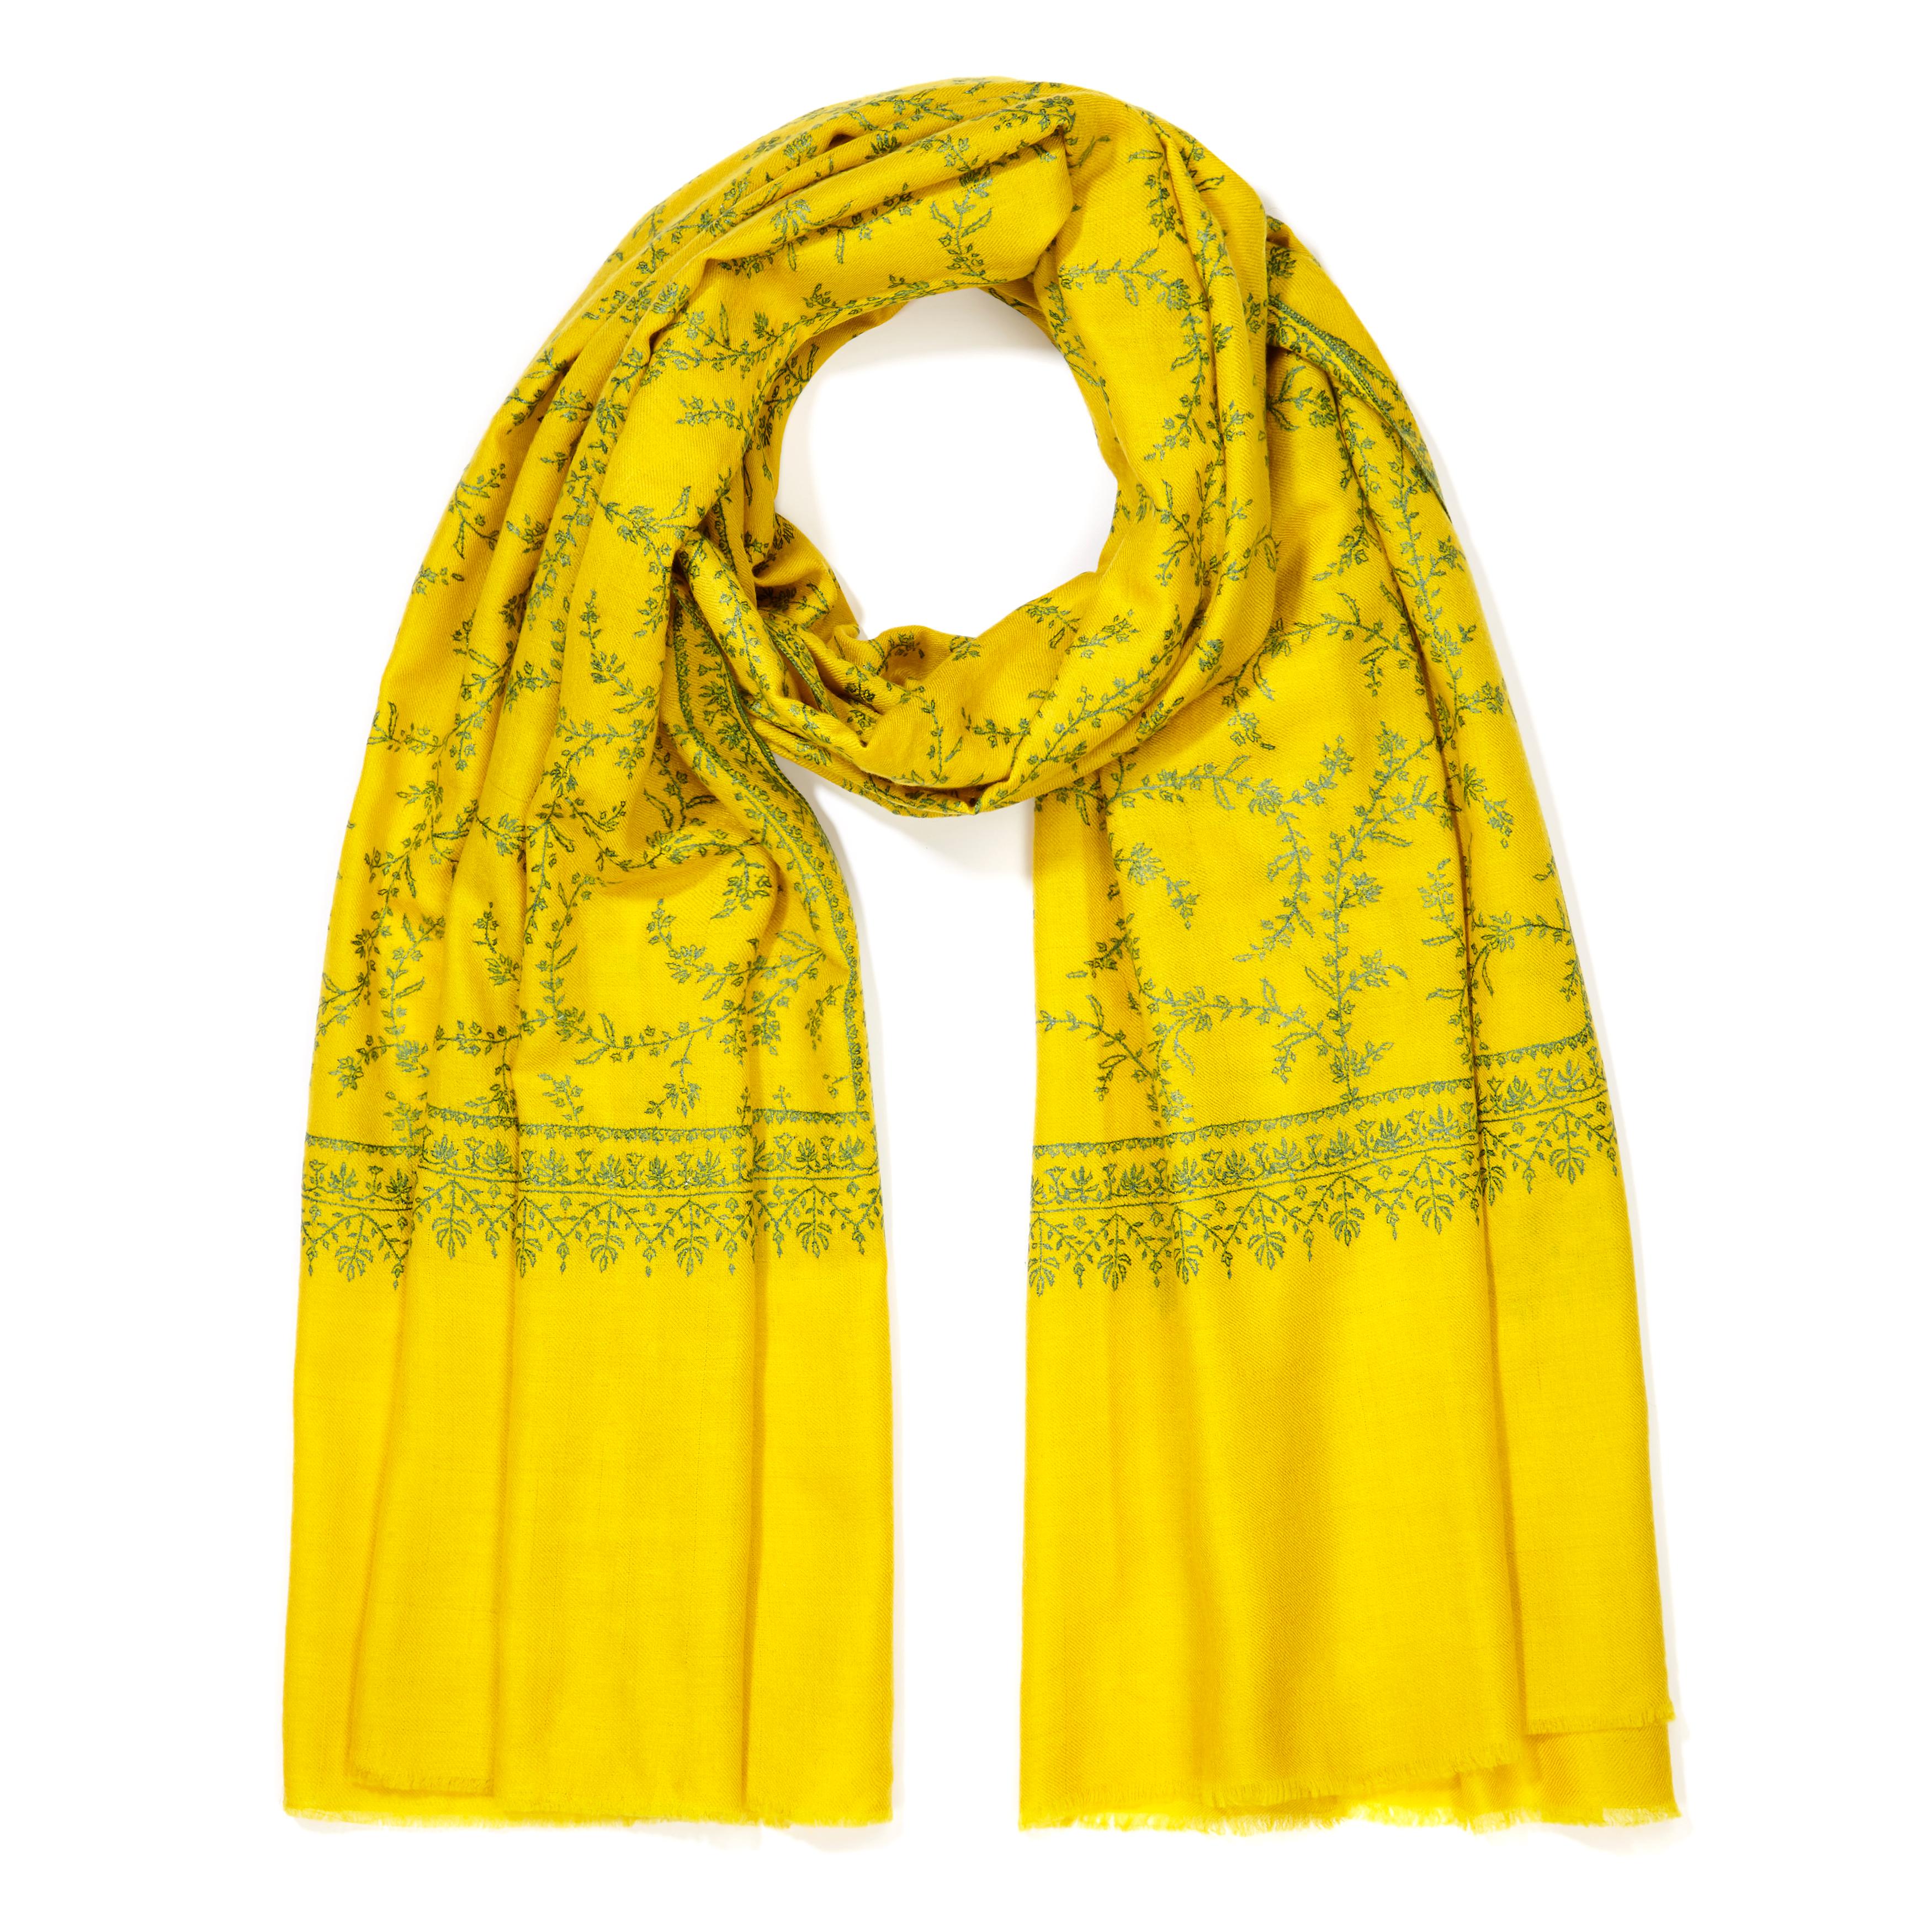 Women's or Men's Hand Embroidered 100% Cashmere Scarf in Yellow Handmade in Kashmir India  For Sale